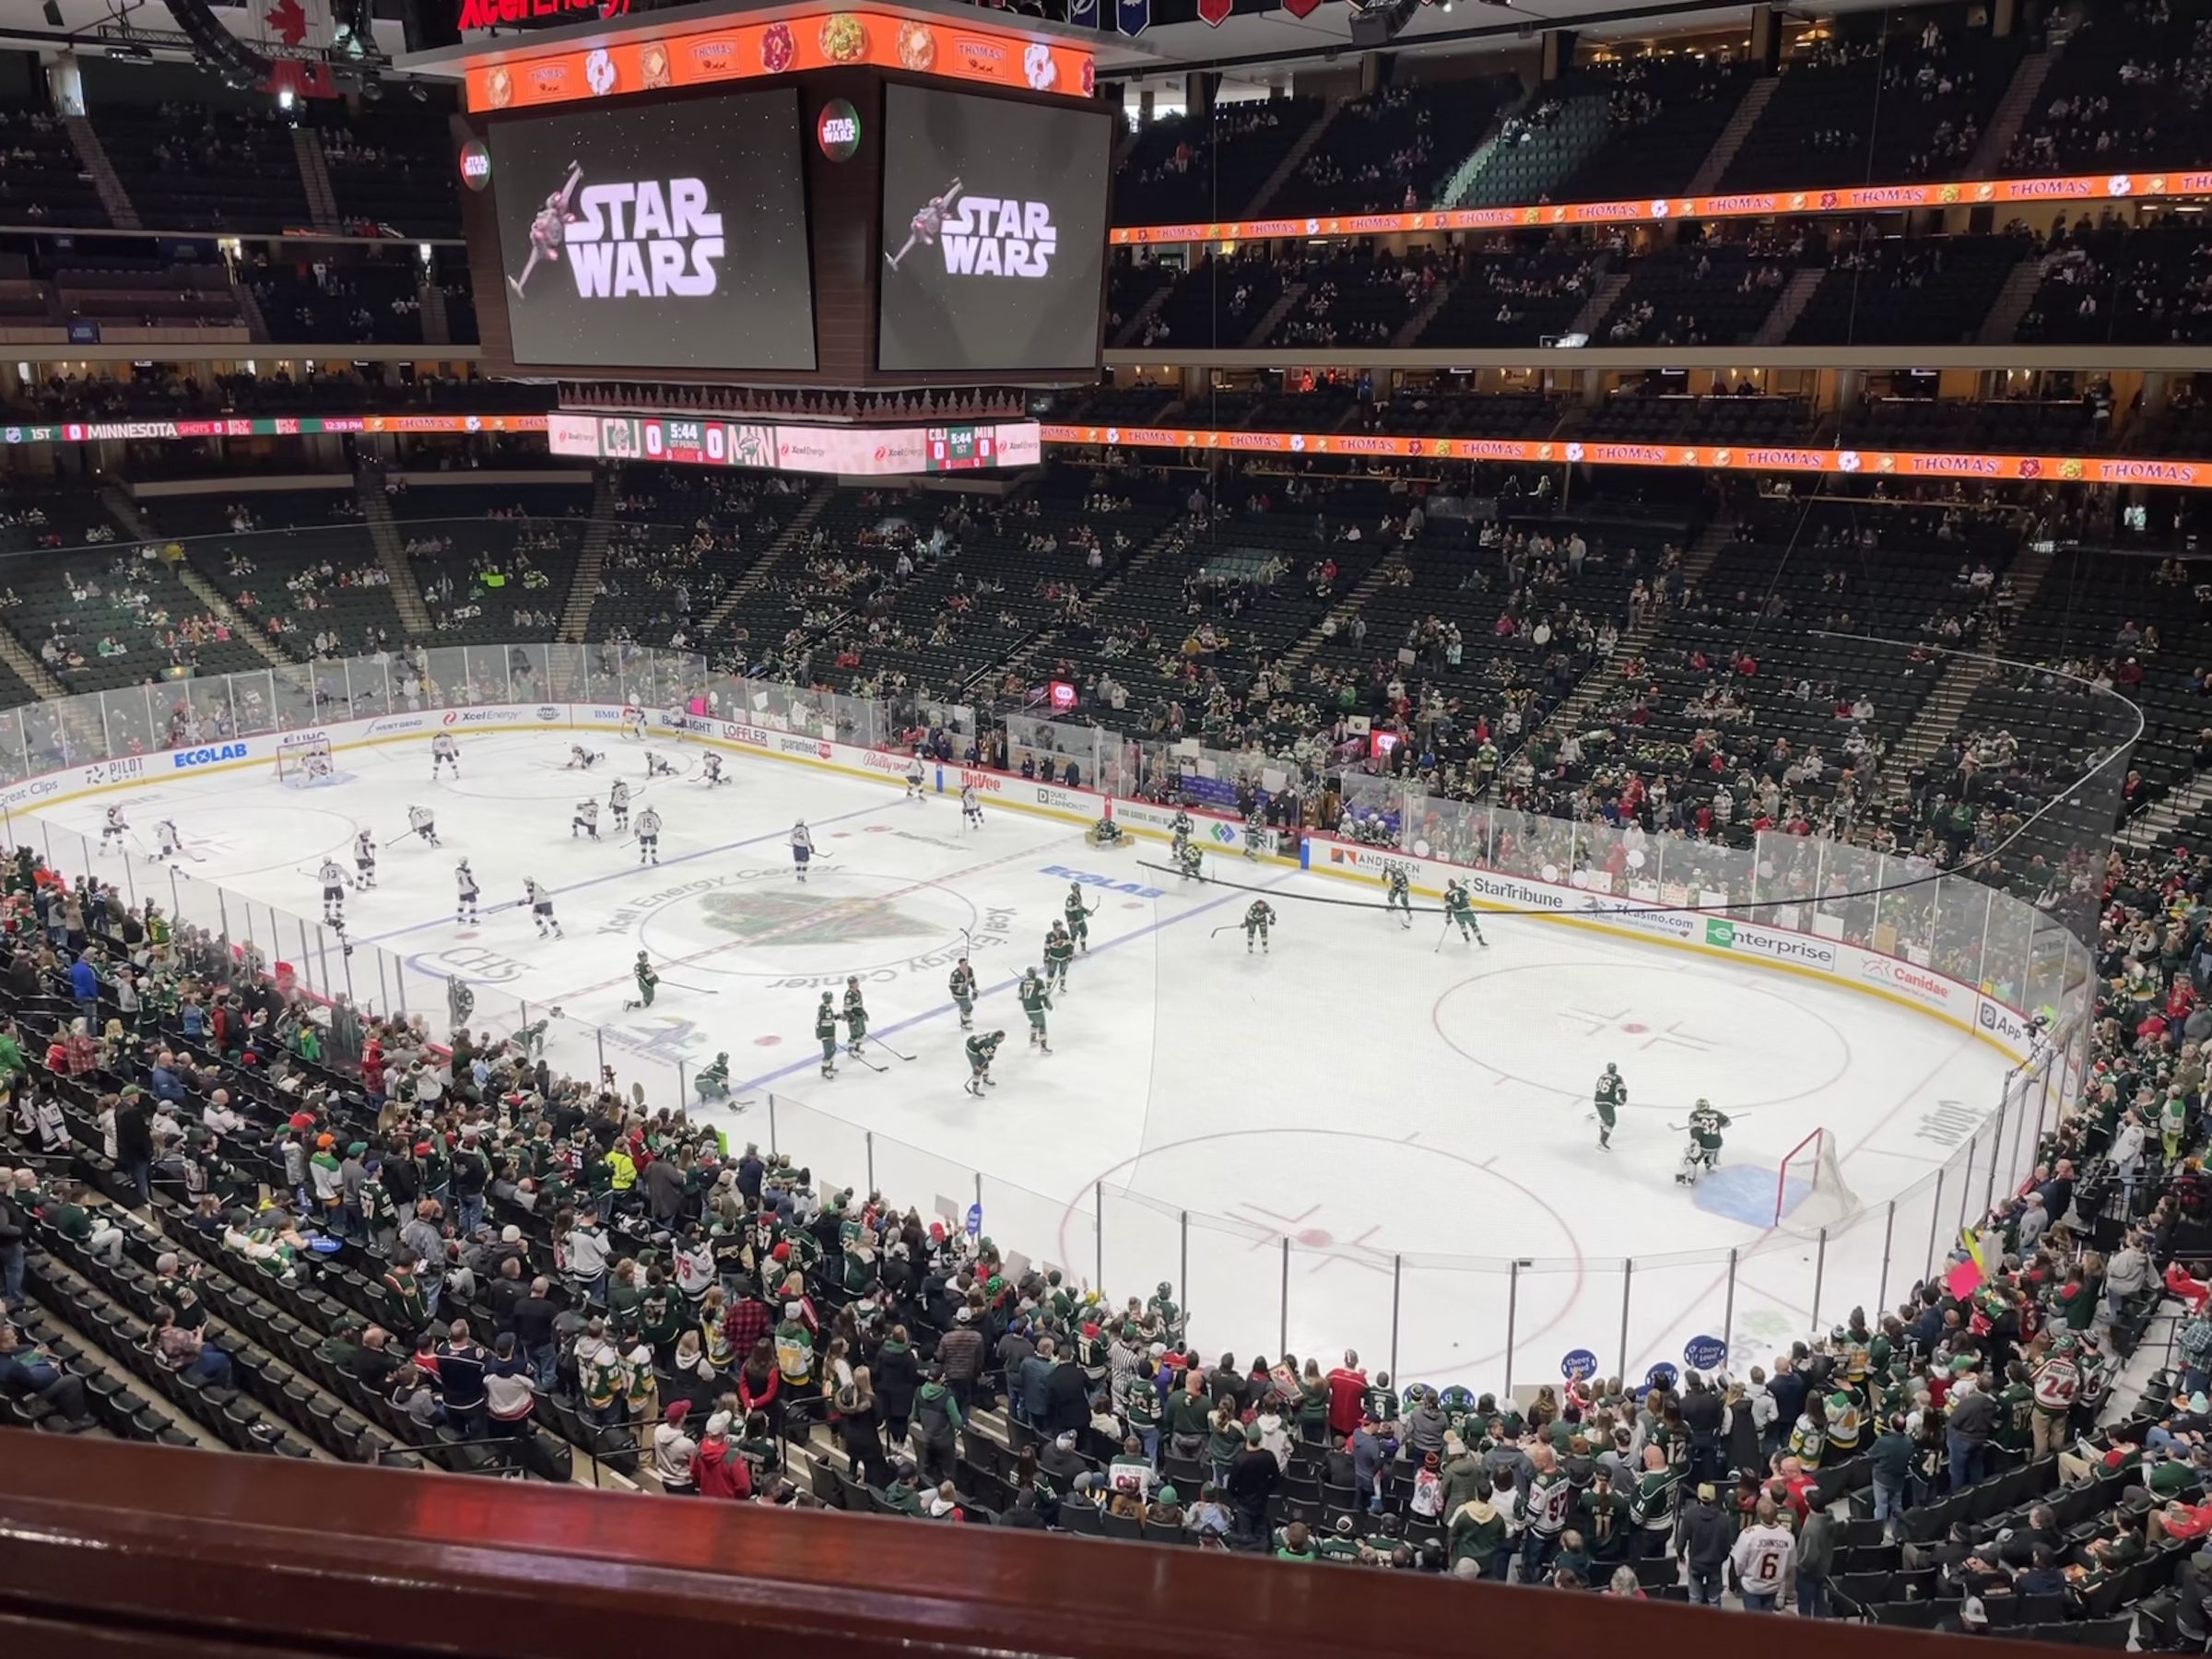 Section 225 at Xcel Energy Center 